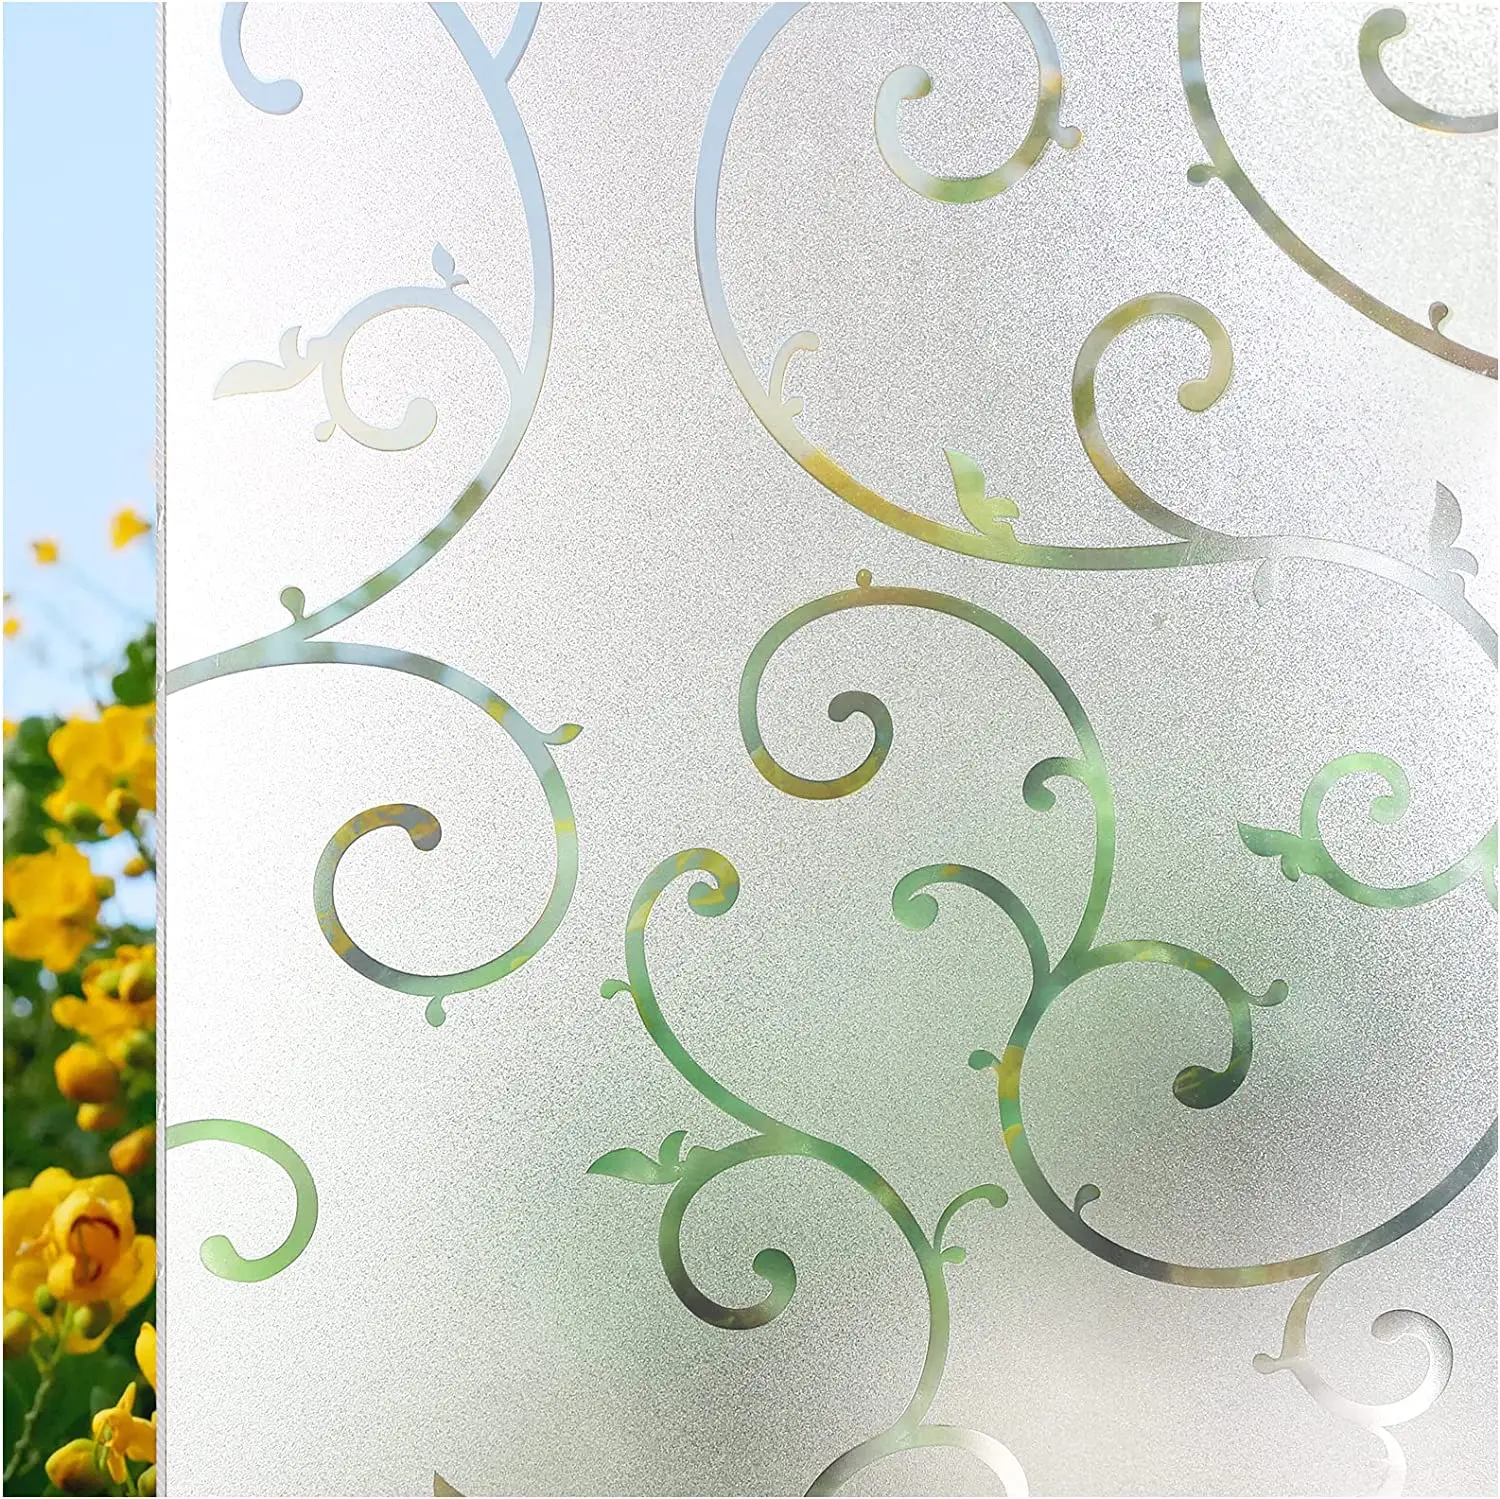 Vinyl Window Film: Frosted, Etched, and Decals - A & I Reprographics